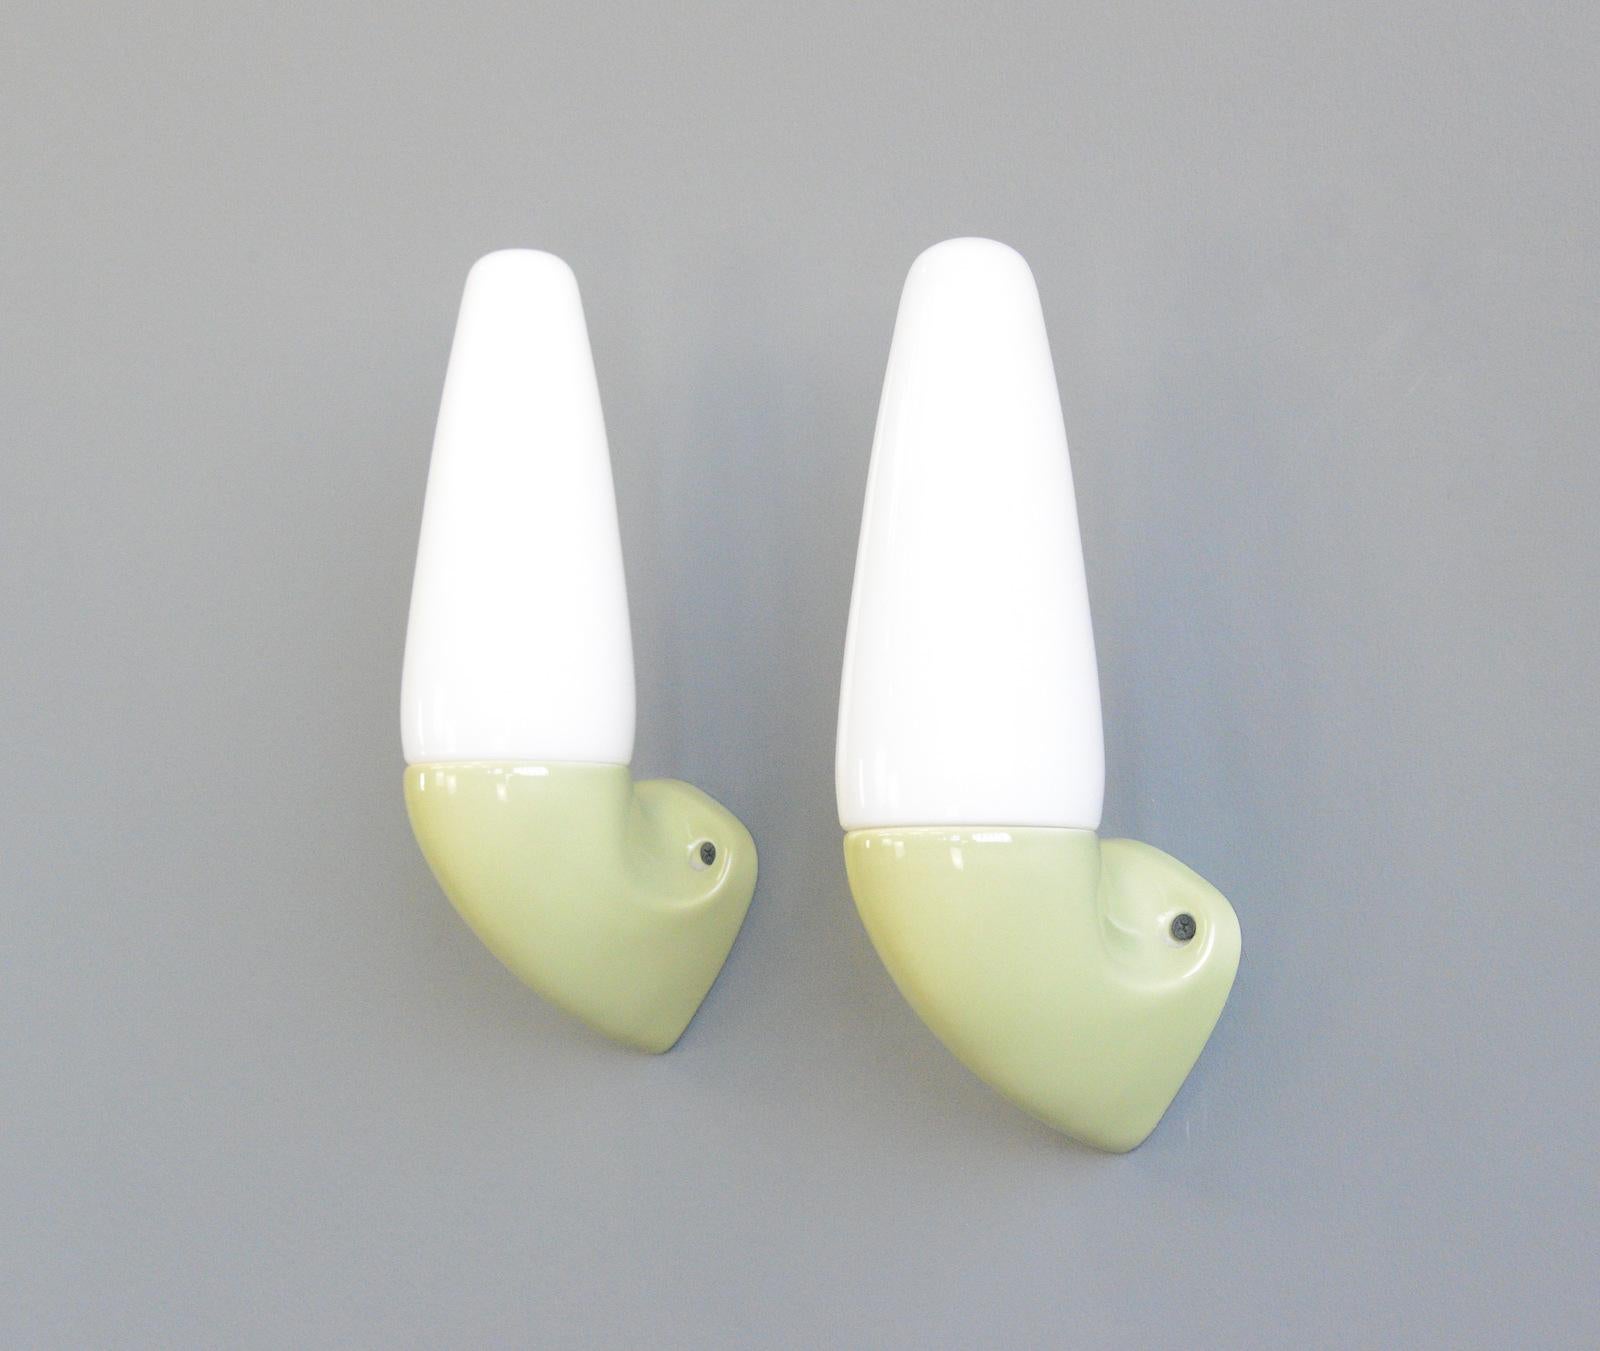 Porcelain Bathroom Lights By Sigvard Bernadotte for Ifo circa 1950s

- Price is per piece (4 available) 
- Vitreous pea green porcelain wall mounts
- Screw off opaline shades
- Takes E27 fitting bulbs
- Wires directly into the wall
- Designed by